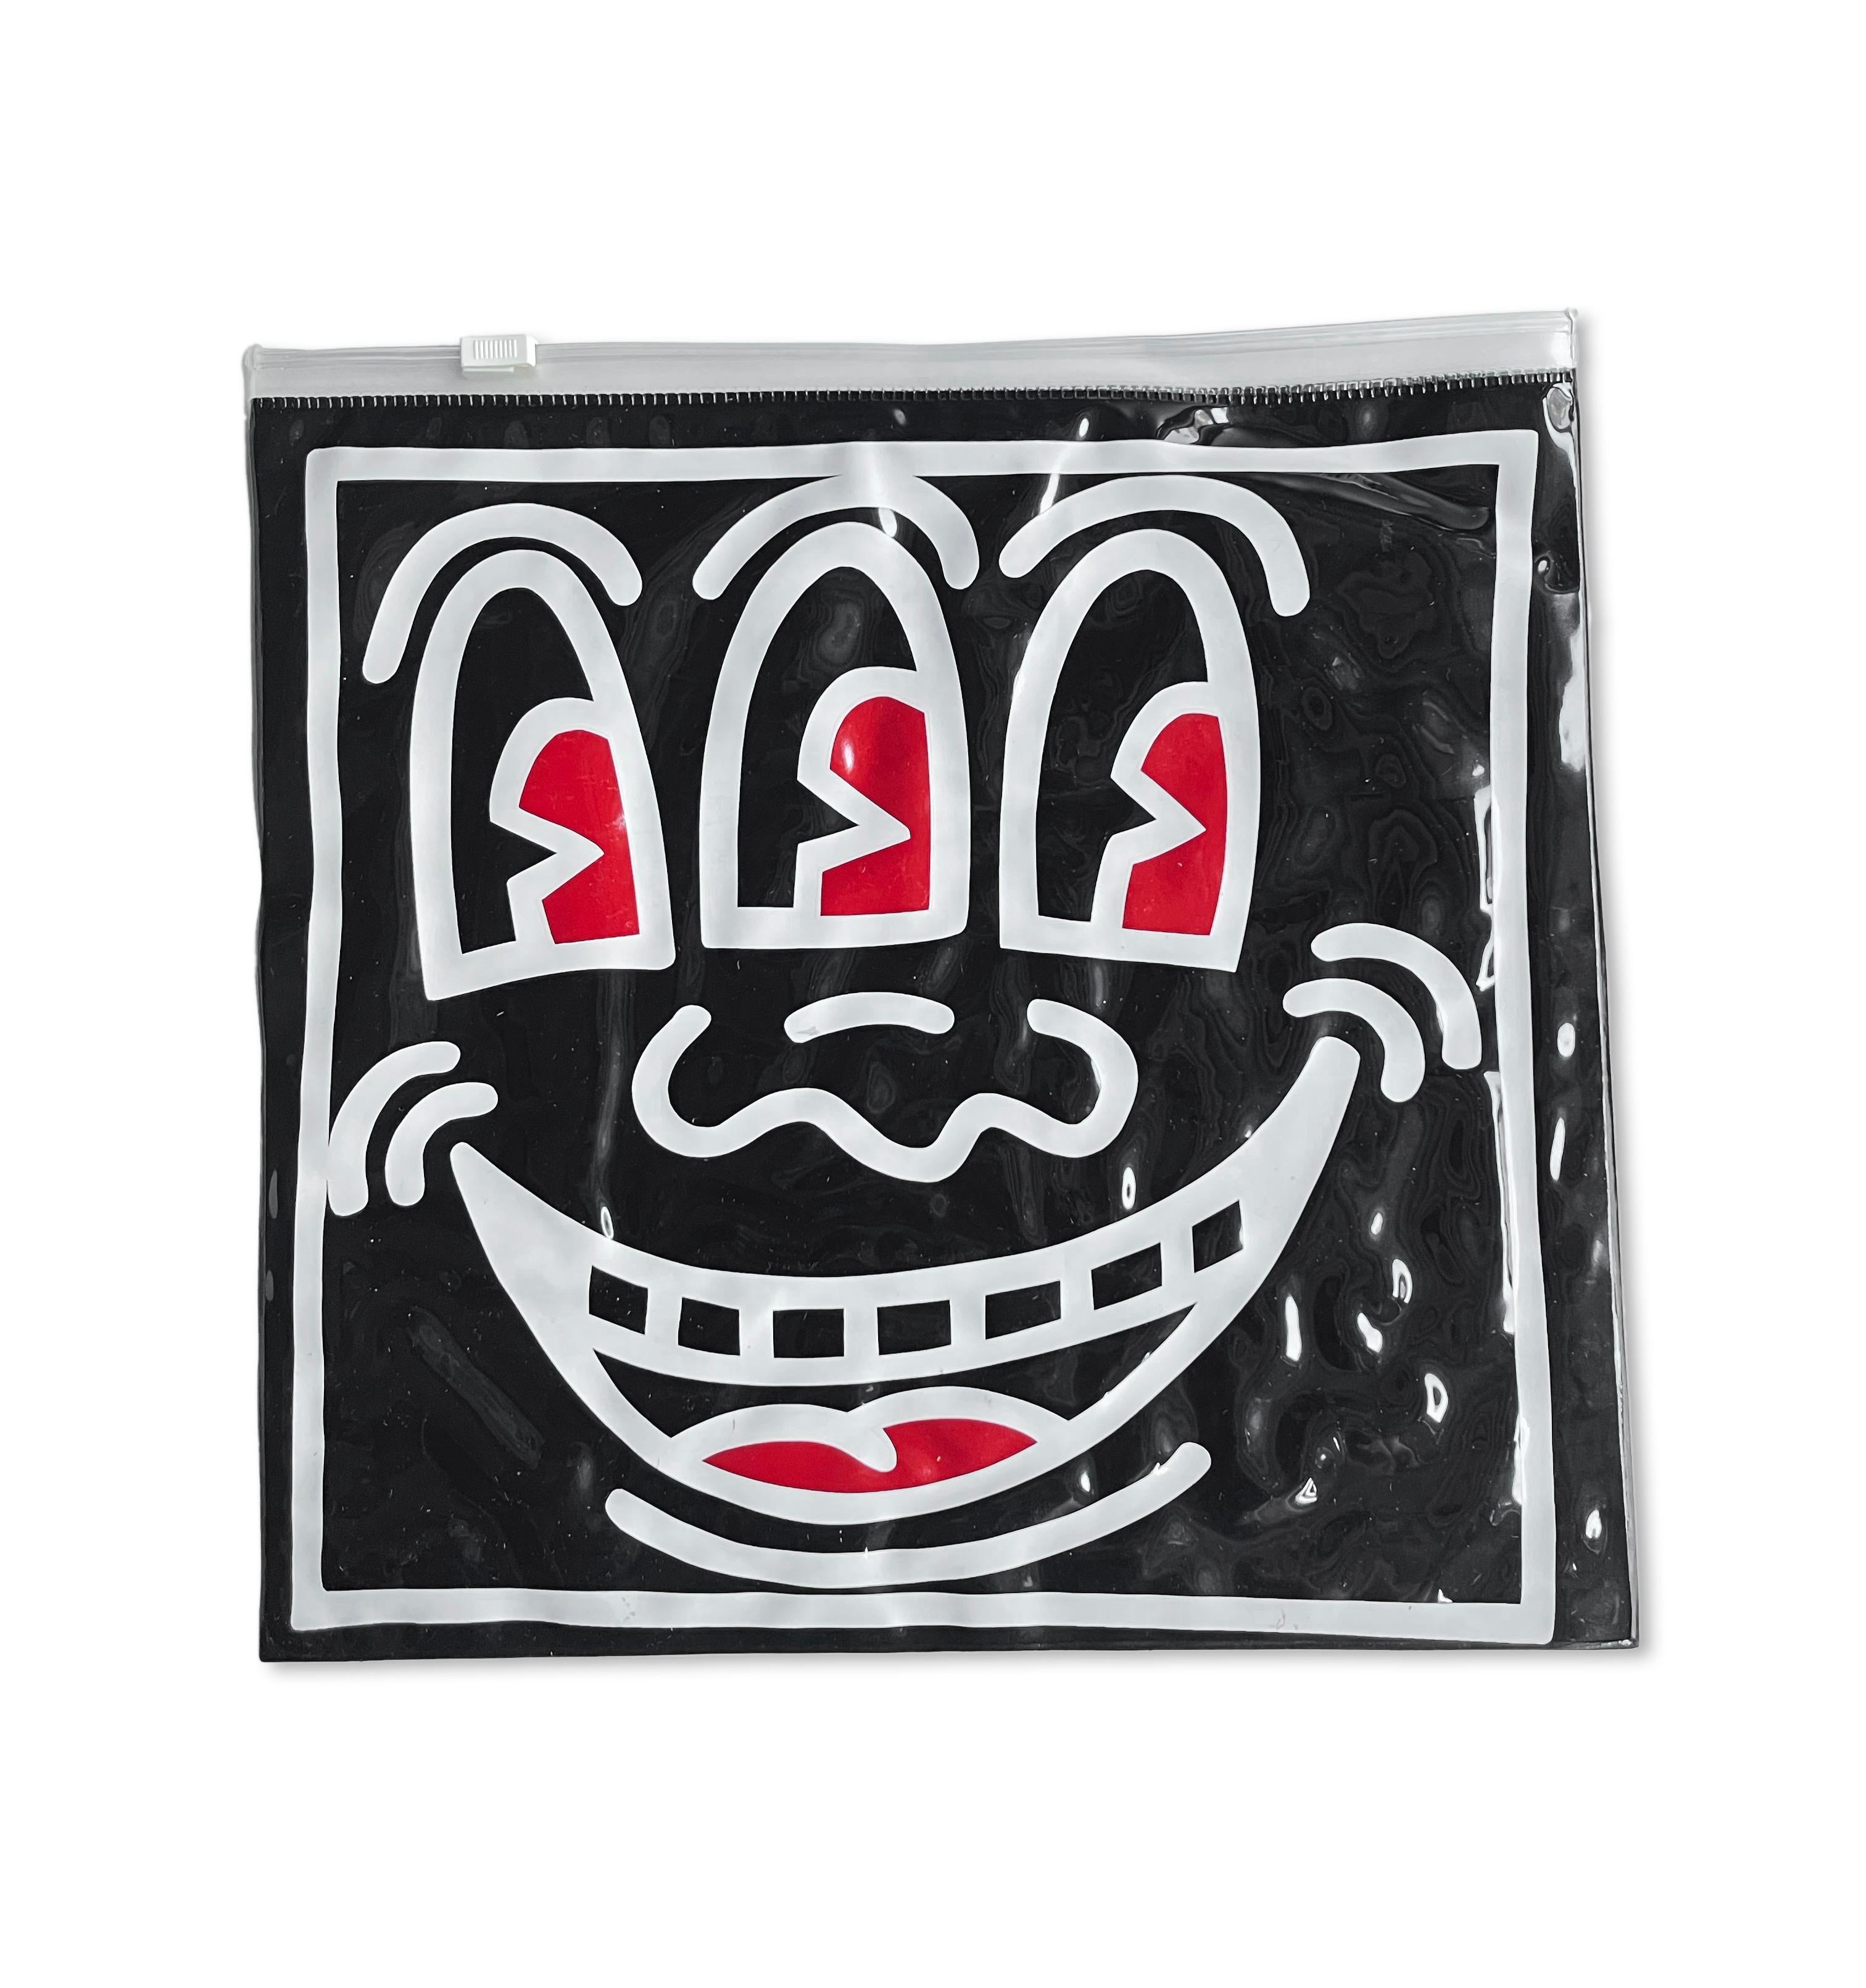 Keith Haring Pop Shop bag c.1987:
Rare original 1980s Keith Haring Pop Shop collectible featuring Keith Haring’s Three Eyed Smiling Face on a double-sided vinyl pouch. A classic 1980s Keith Haring Pop Shop collectible that is well-suited for